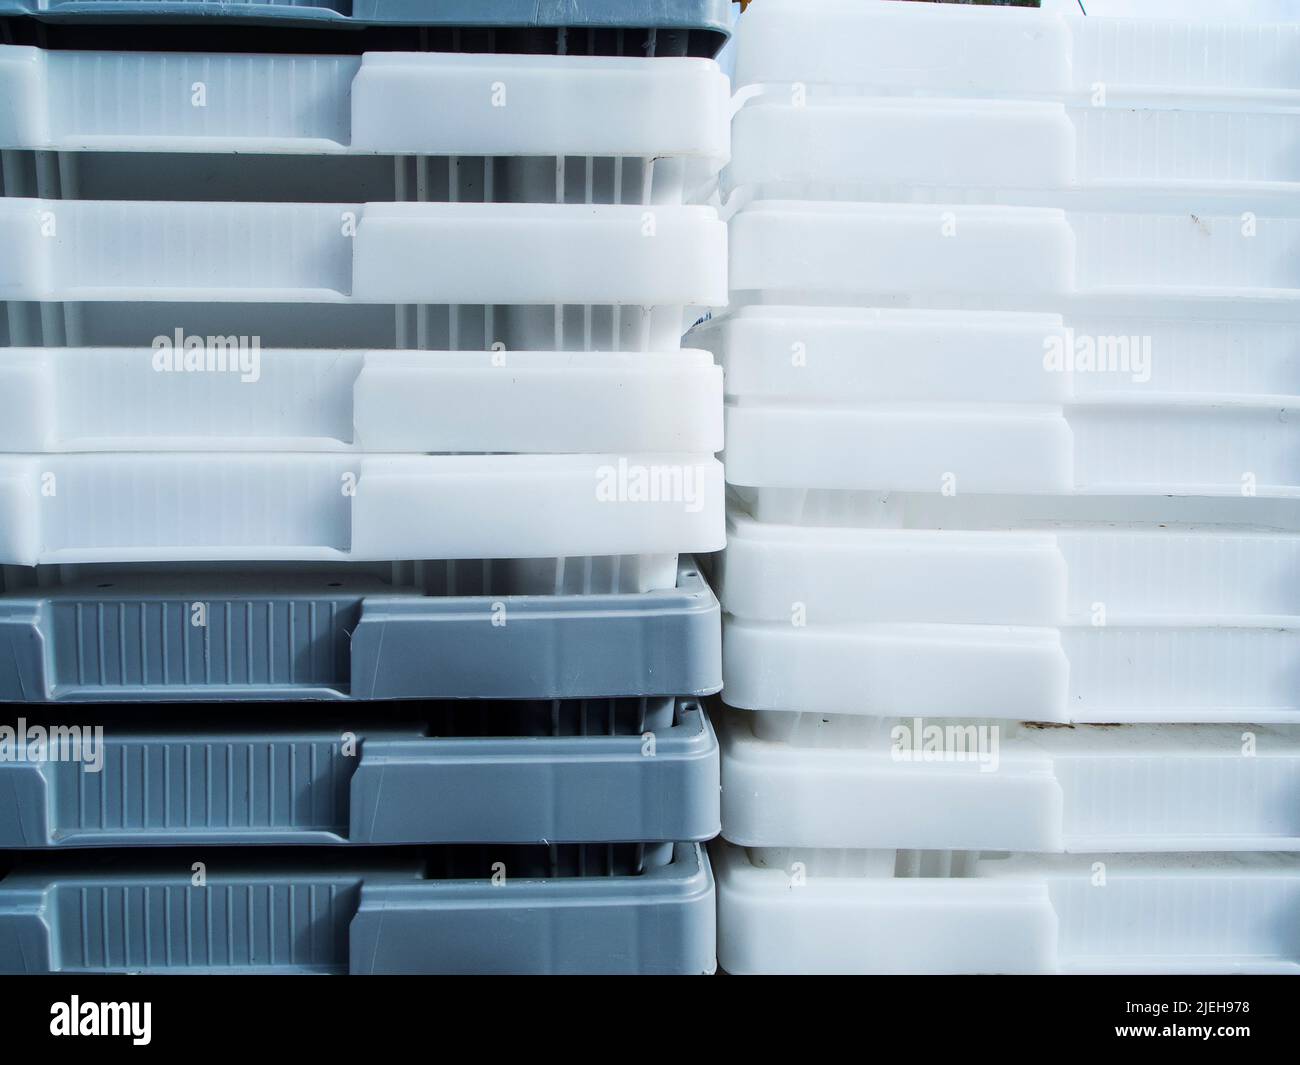 Close-up view of white and gray plastic containers stacked inside. Stock Photo